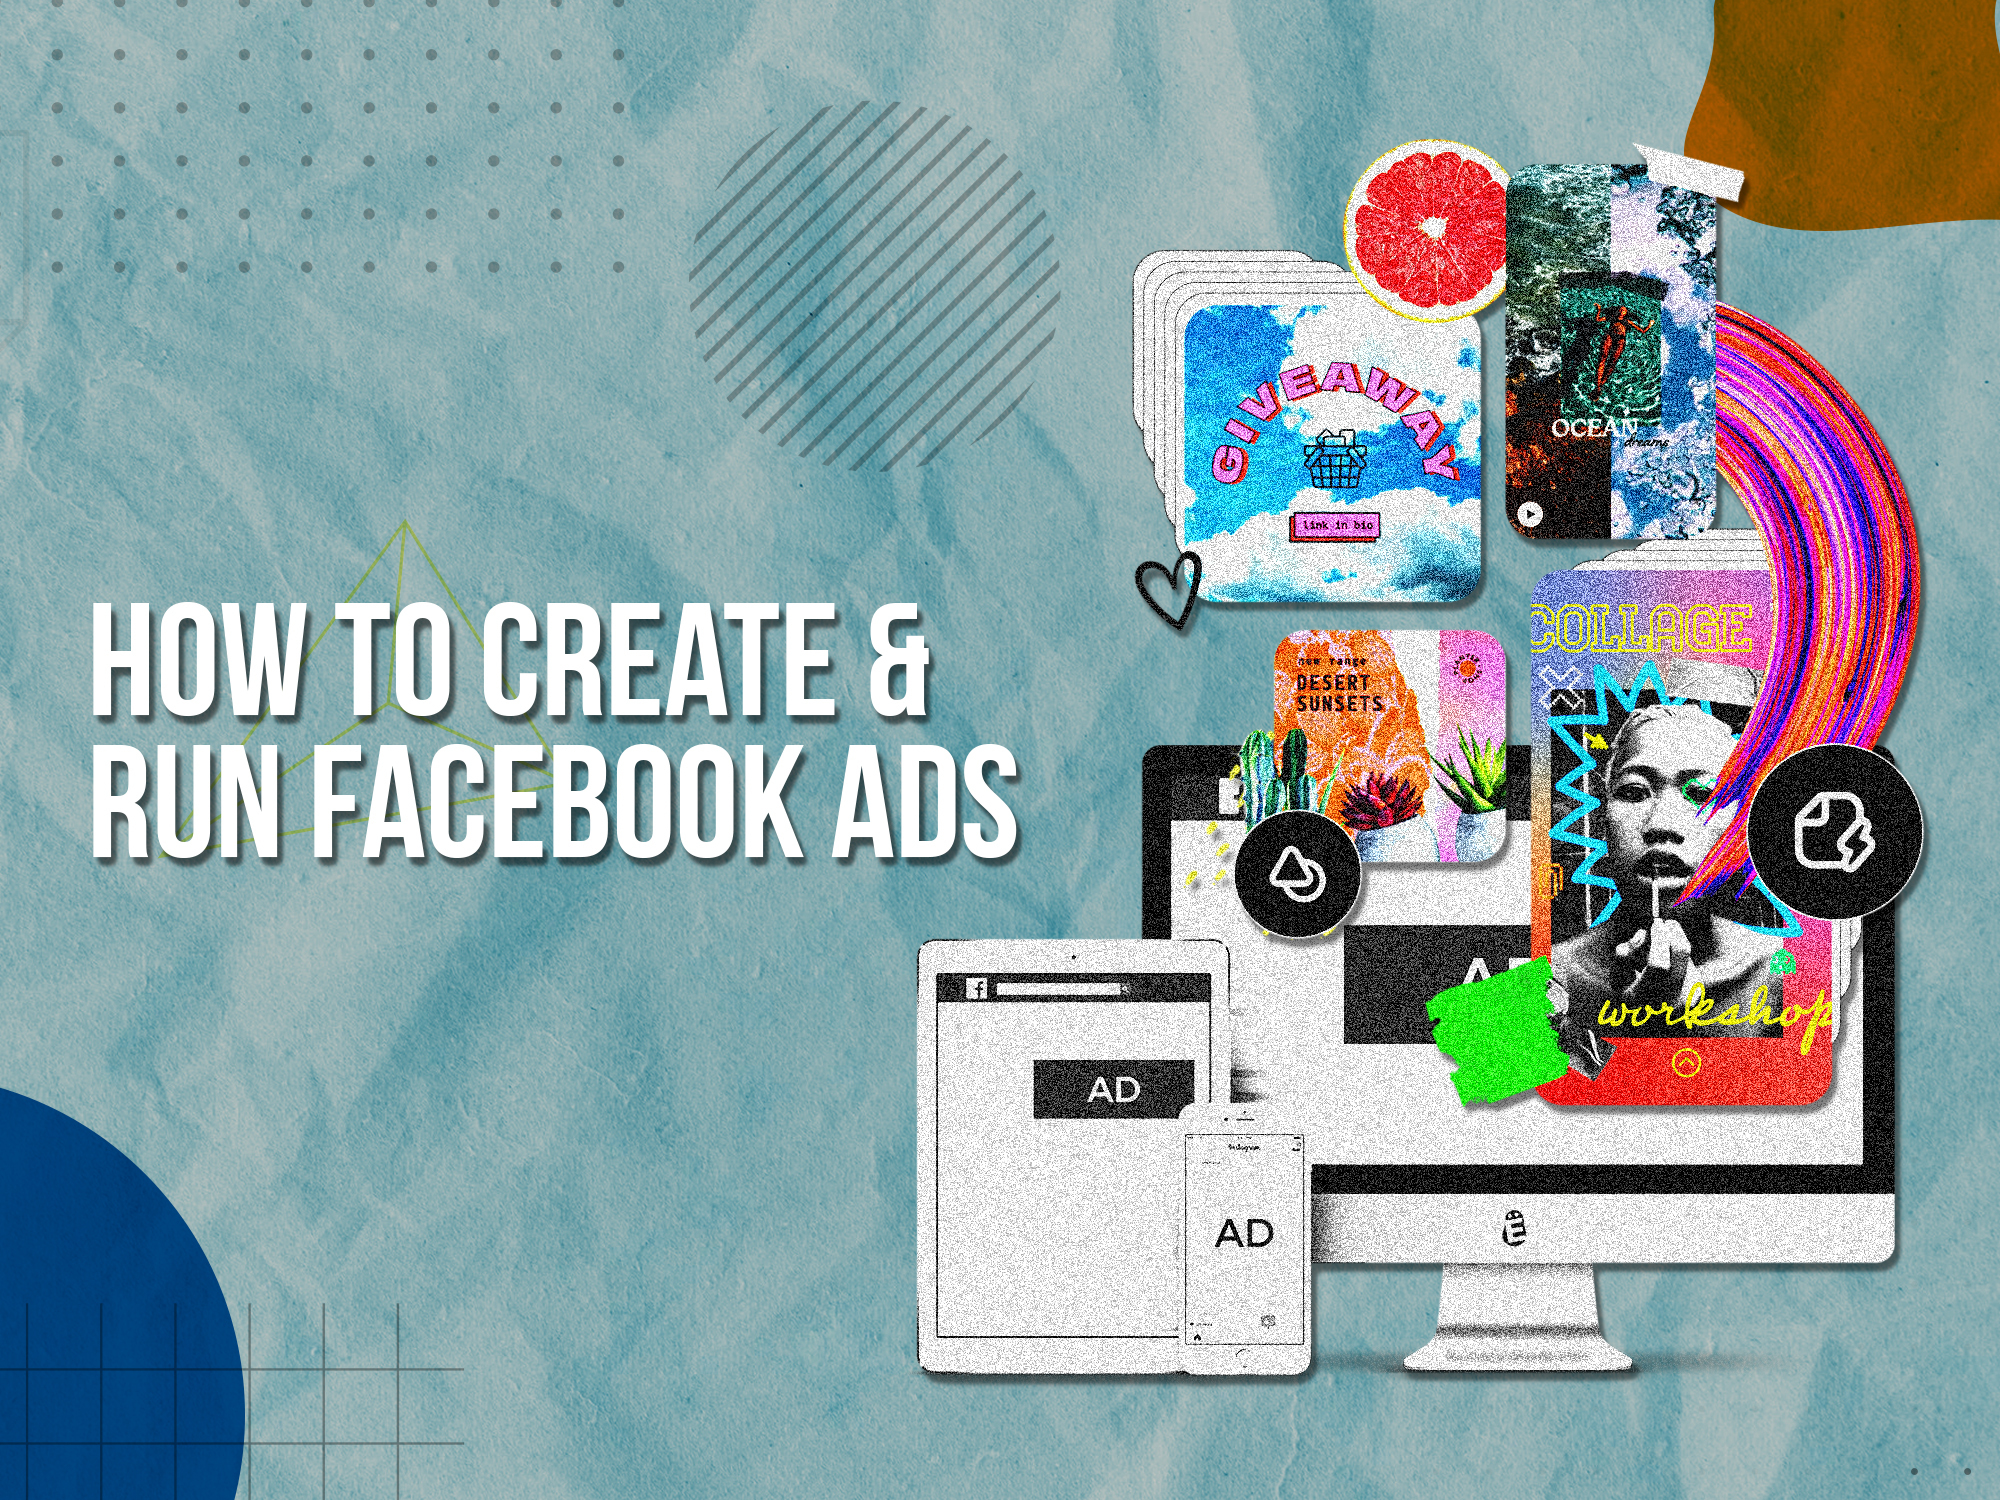 How to Create Profitable Facebook Ads: Step By Step Guide